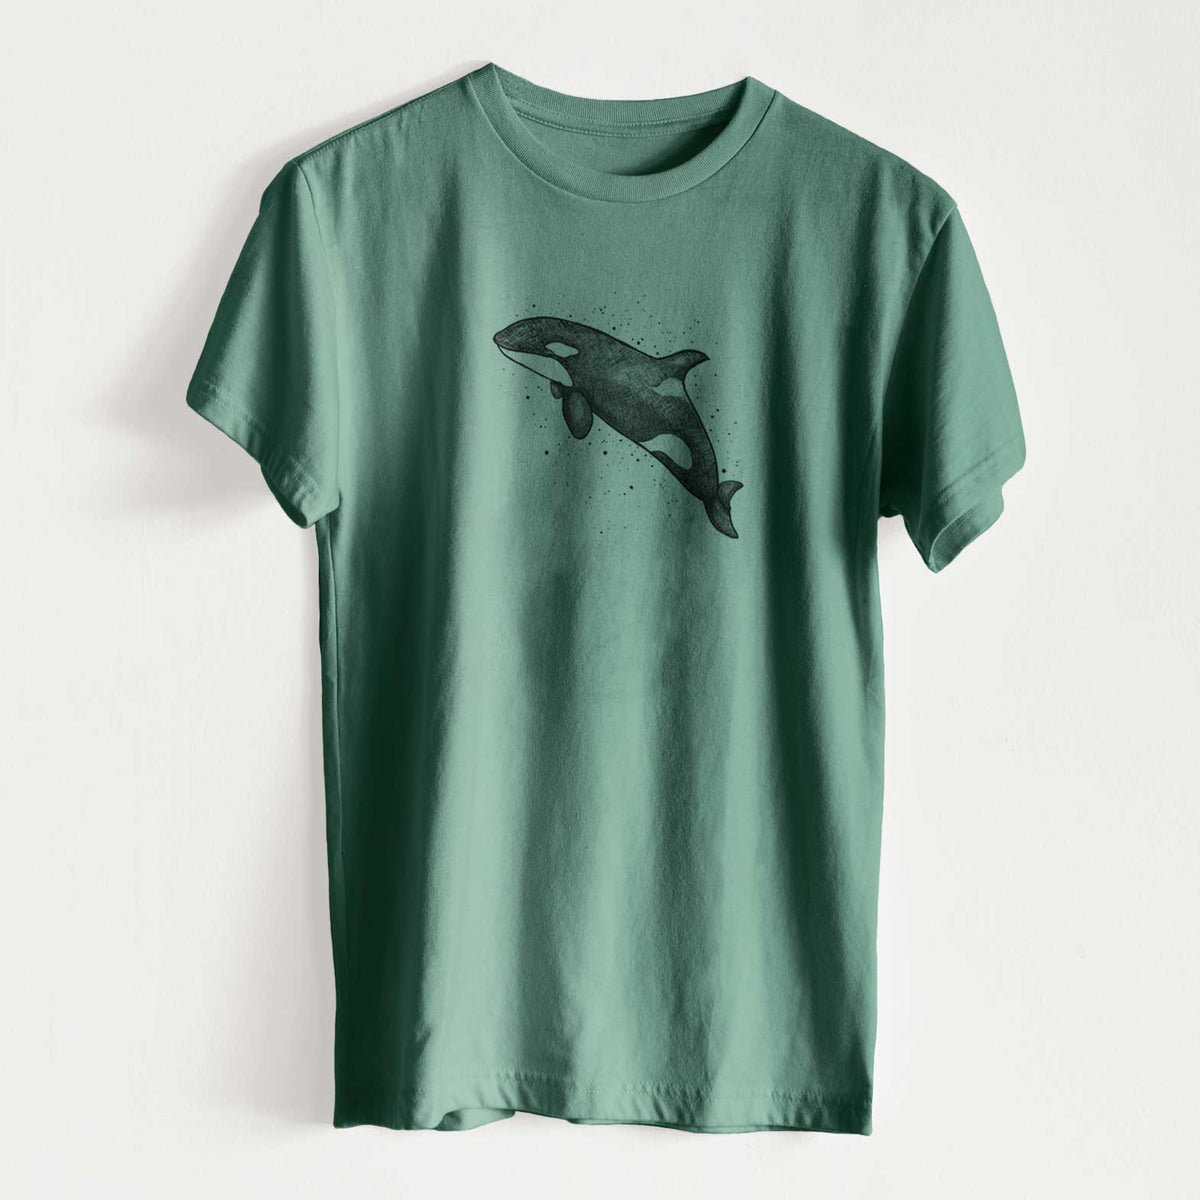 Orca Whale - Unisex Recycled Eco Tee  - CLOSEOUT - FINAL SALE